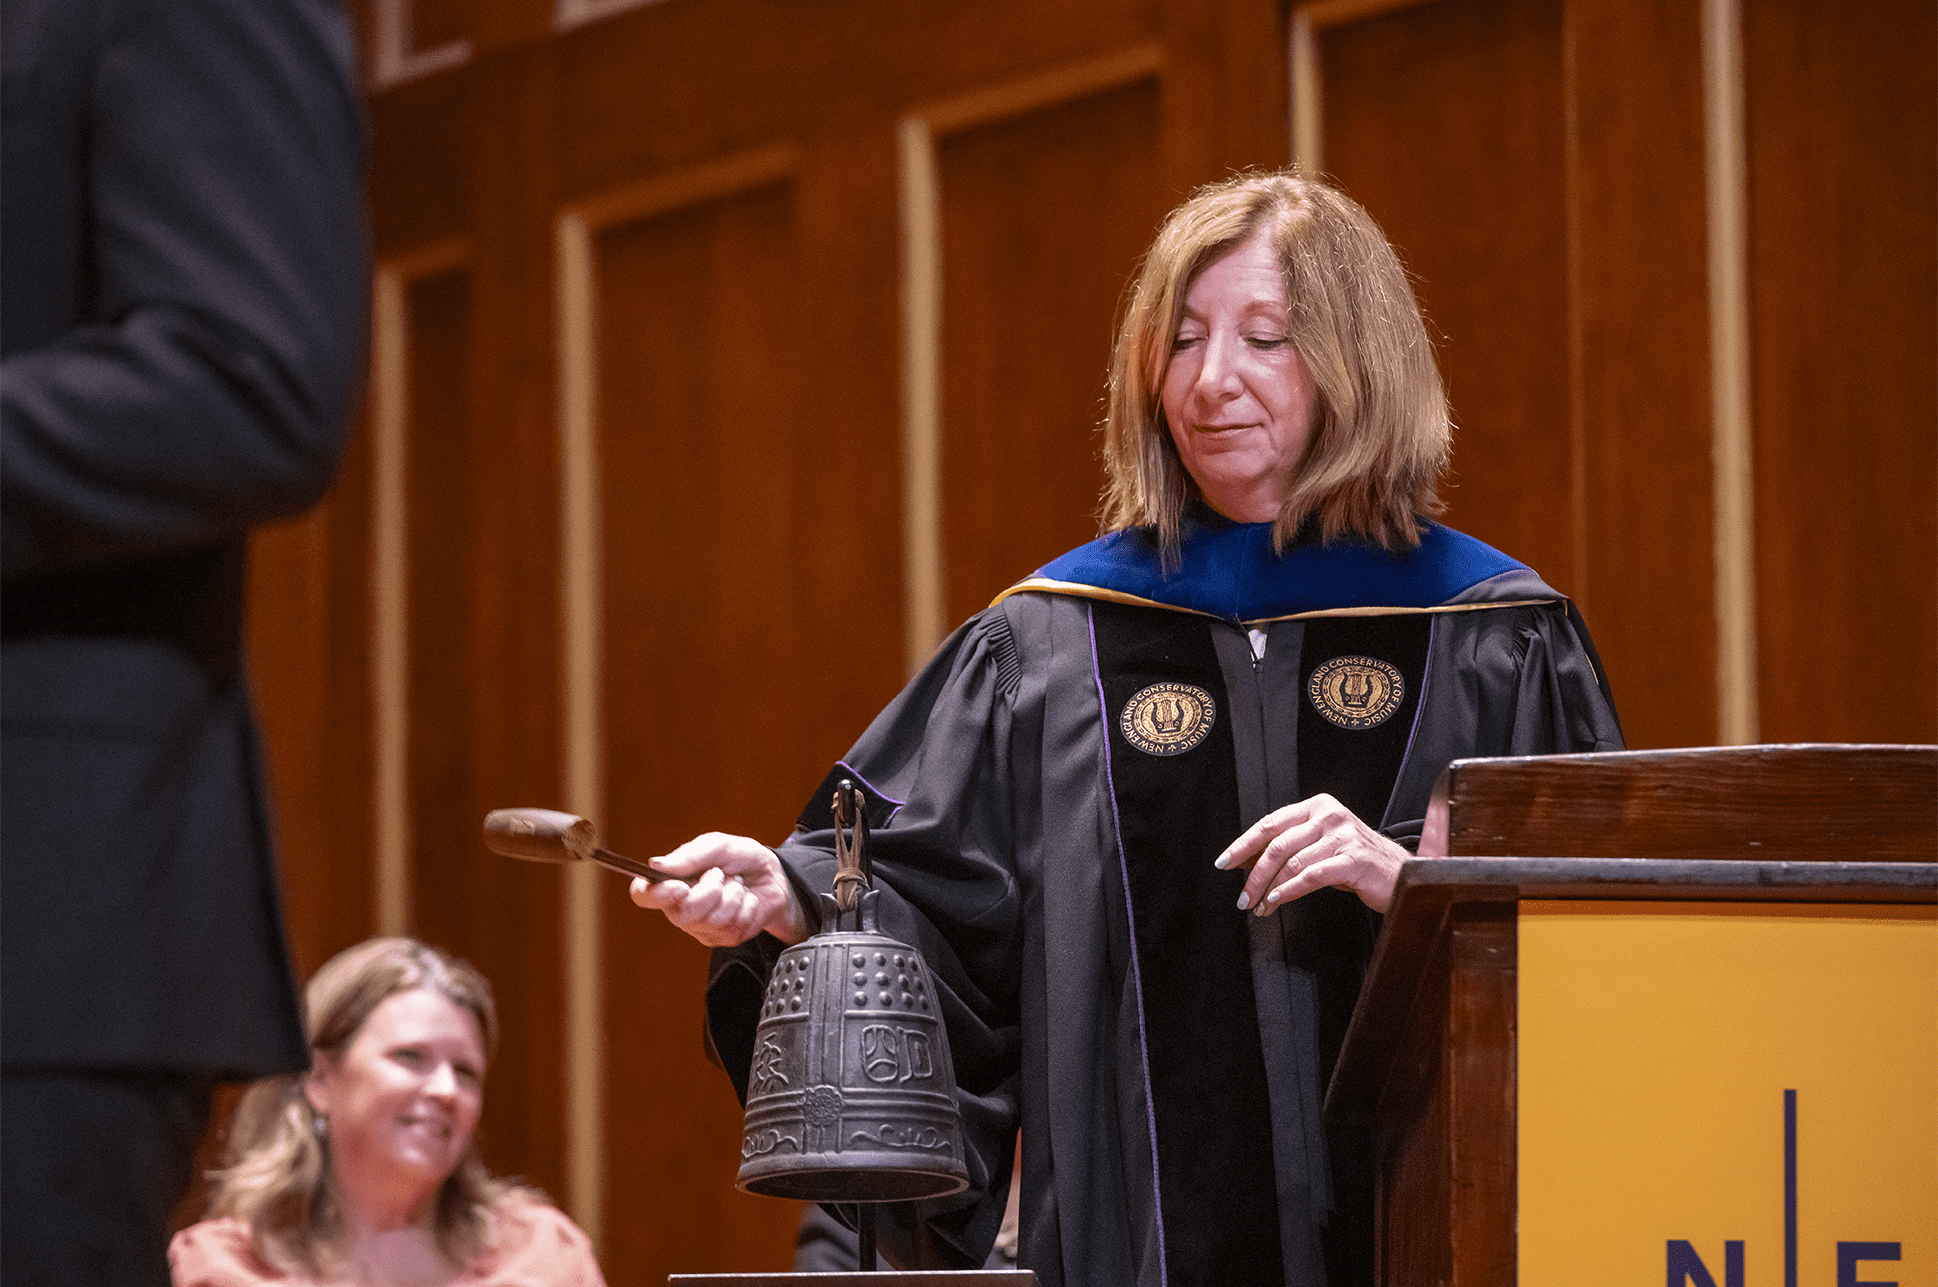 Andrea Kalyn rings the bell at Convocation